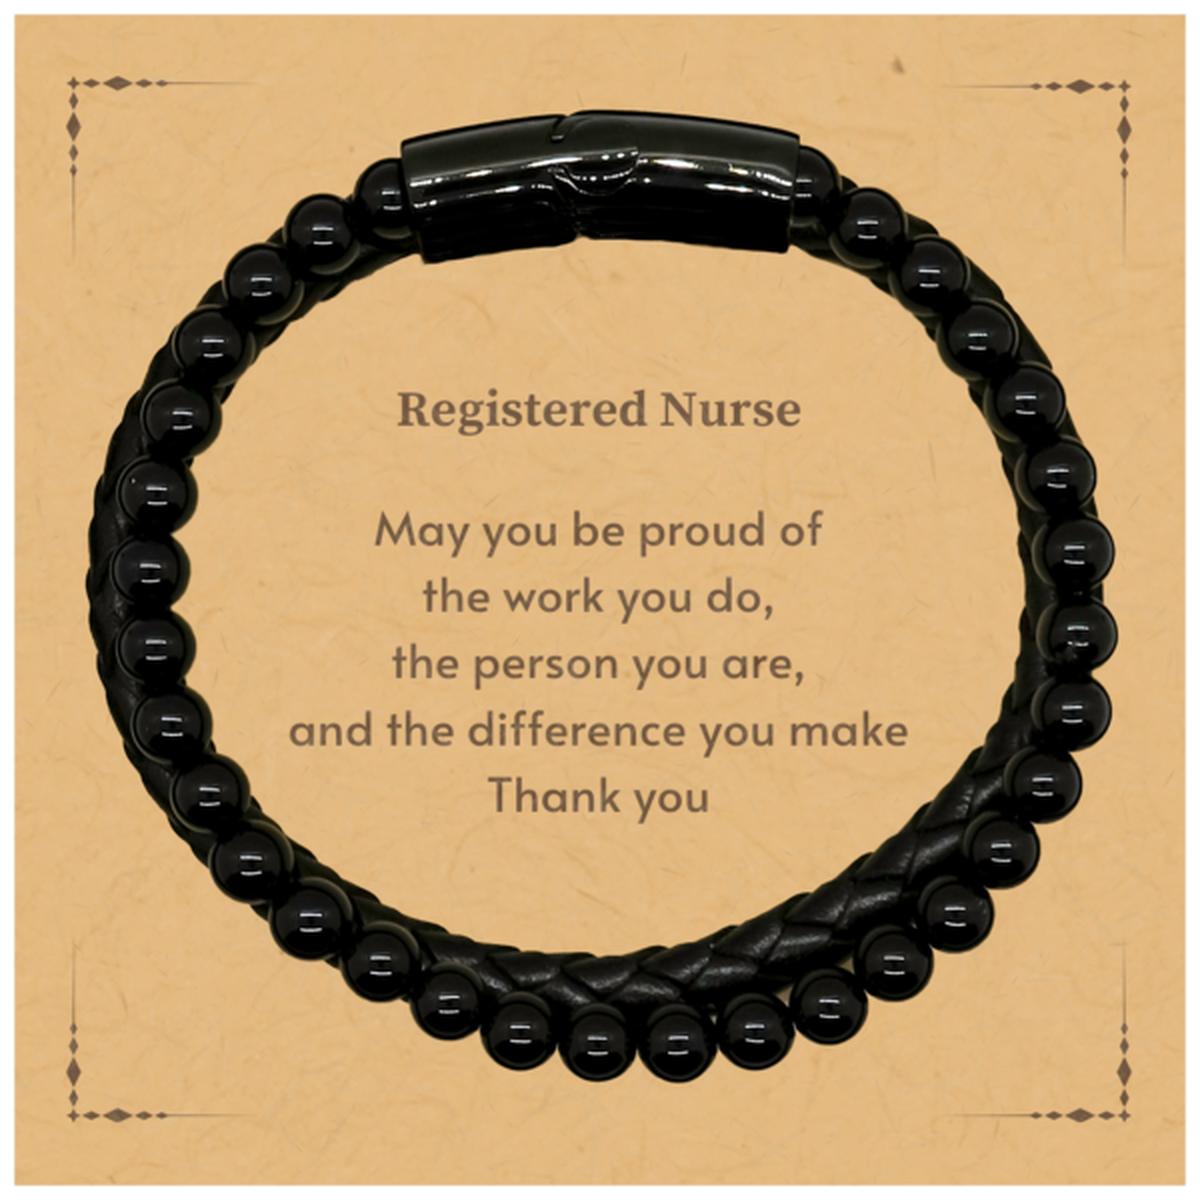 Heartwarming Stone Leather Bracelets Retirement Coworkers Gifts for Registered Nurse, Registered Nurse May You be proud of the work you do, the person you are Gifts for Boss Men Women Friends